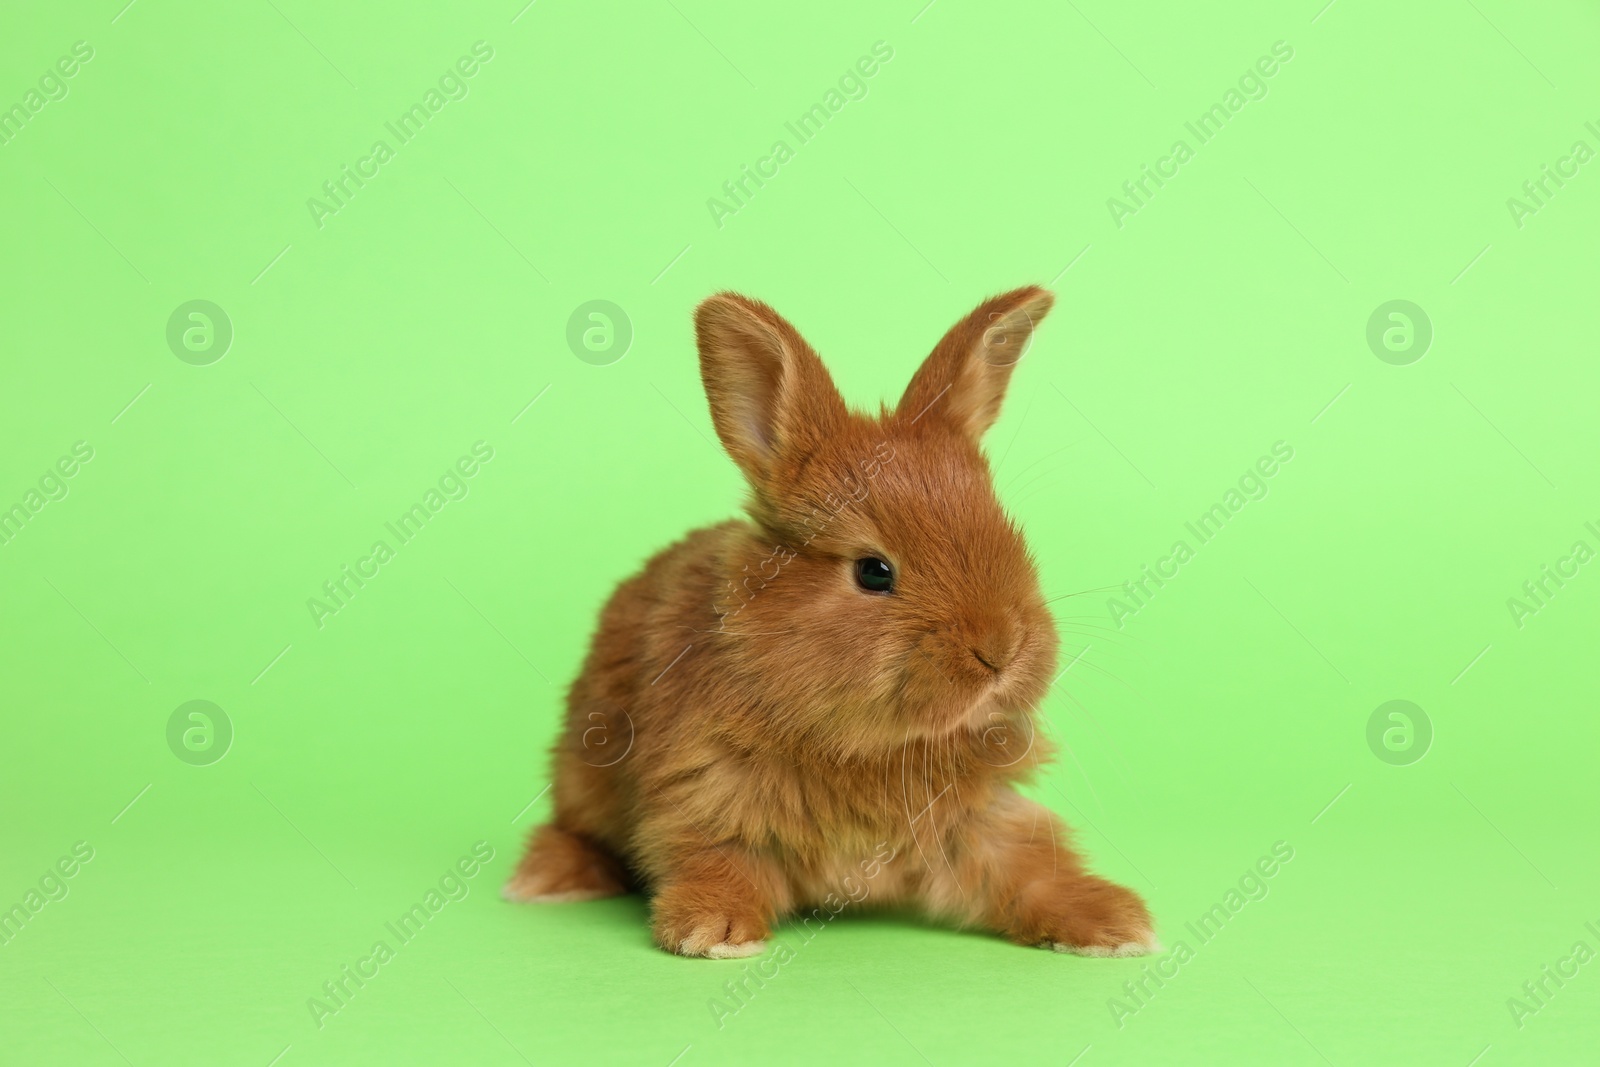 Photo of Adorable fluffy bunny on green background. Easter symbol